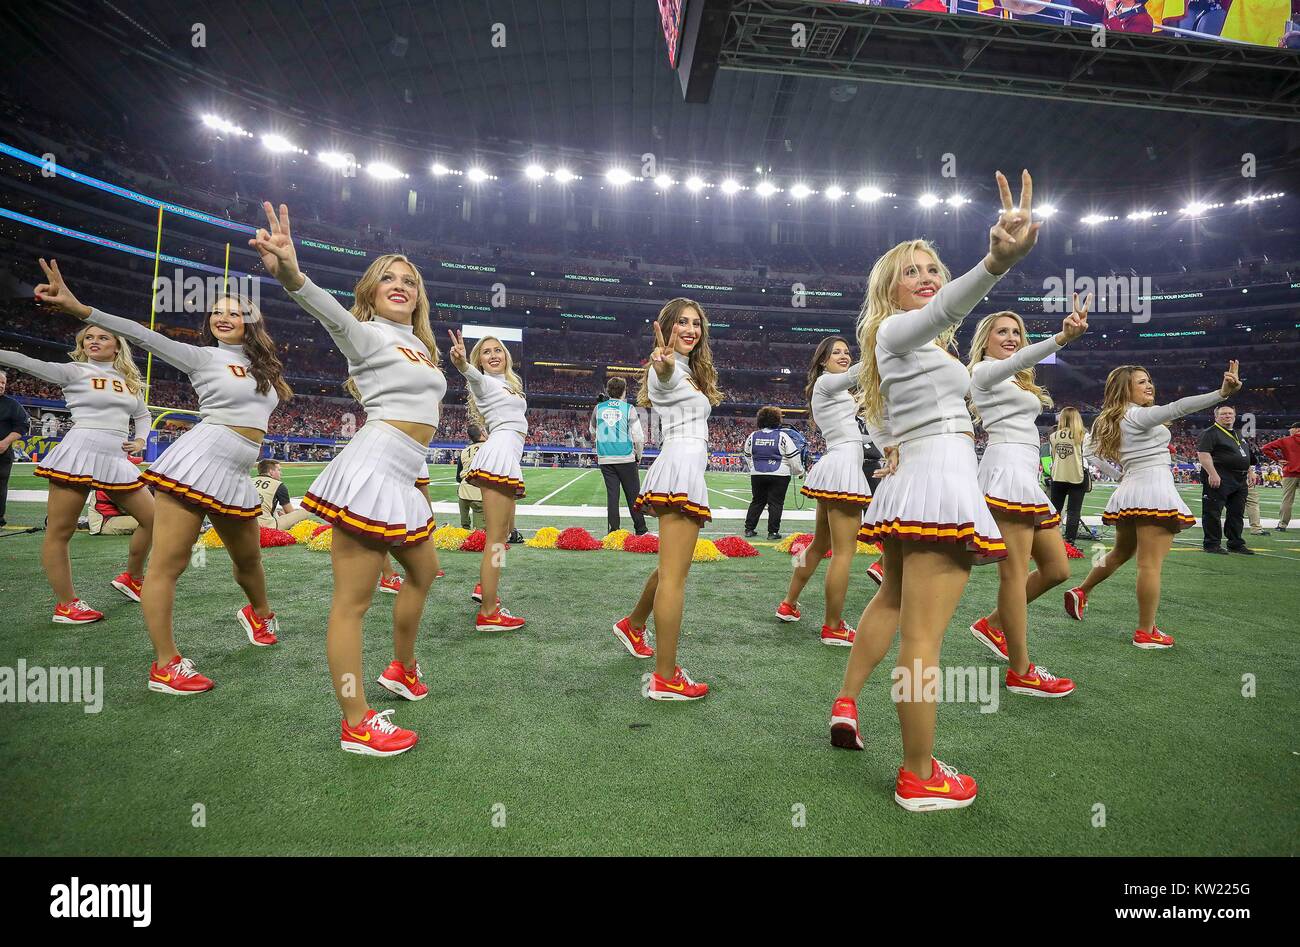 Arlington, TX, USA. 29th Dec, 2017. USC Trojans cheerleader cheer during the third quarter during the Goodyear Cotton Bowl Classic between the USC Trojans and the Ohio State Buckeyes at AT&T Stadium in Arlington, TX. John Glaser/CSM/Alamy Live News Stock Photo